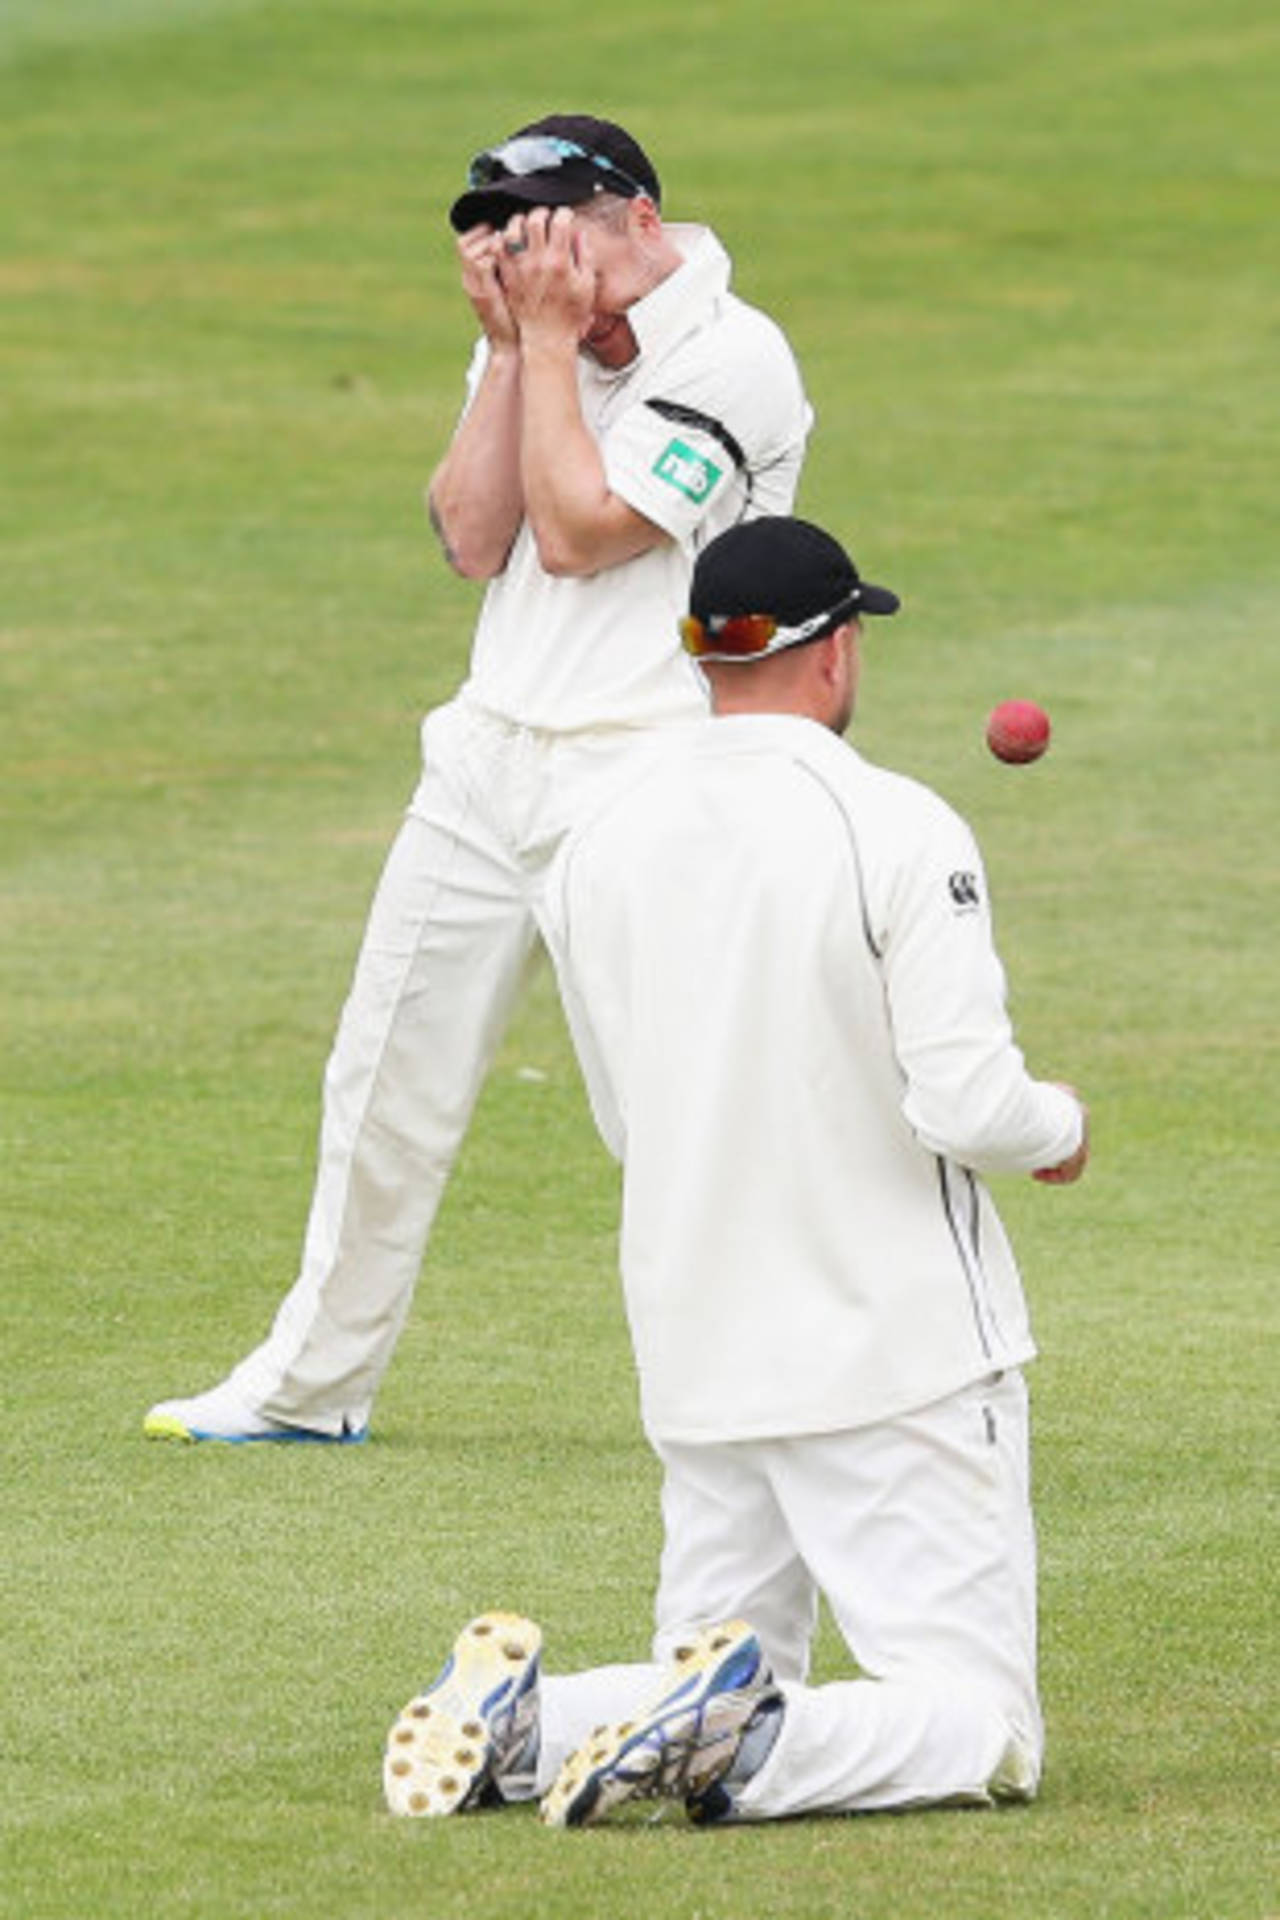 Brendon McCullum reacts after a dropped catch, New Zealand v West Indies, 1st Test, Dunedin, 5th day, December 7, 2013